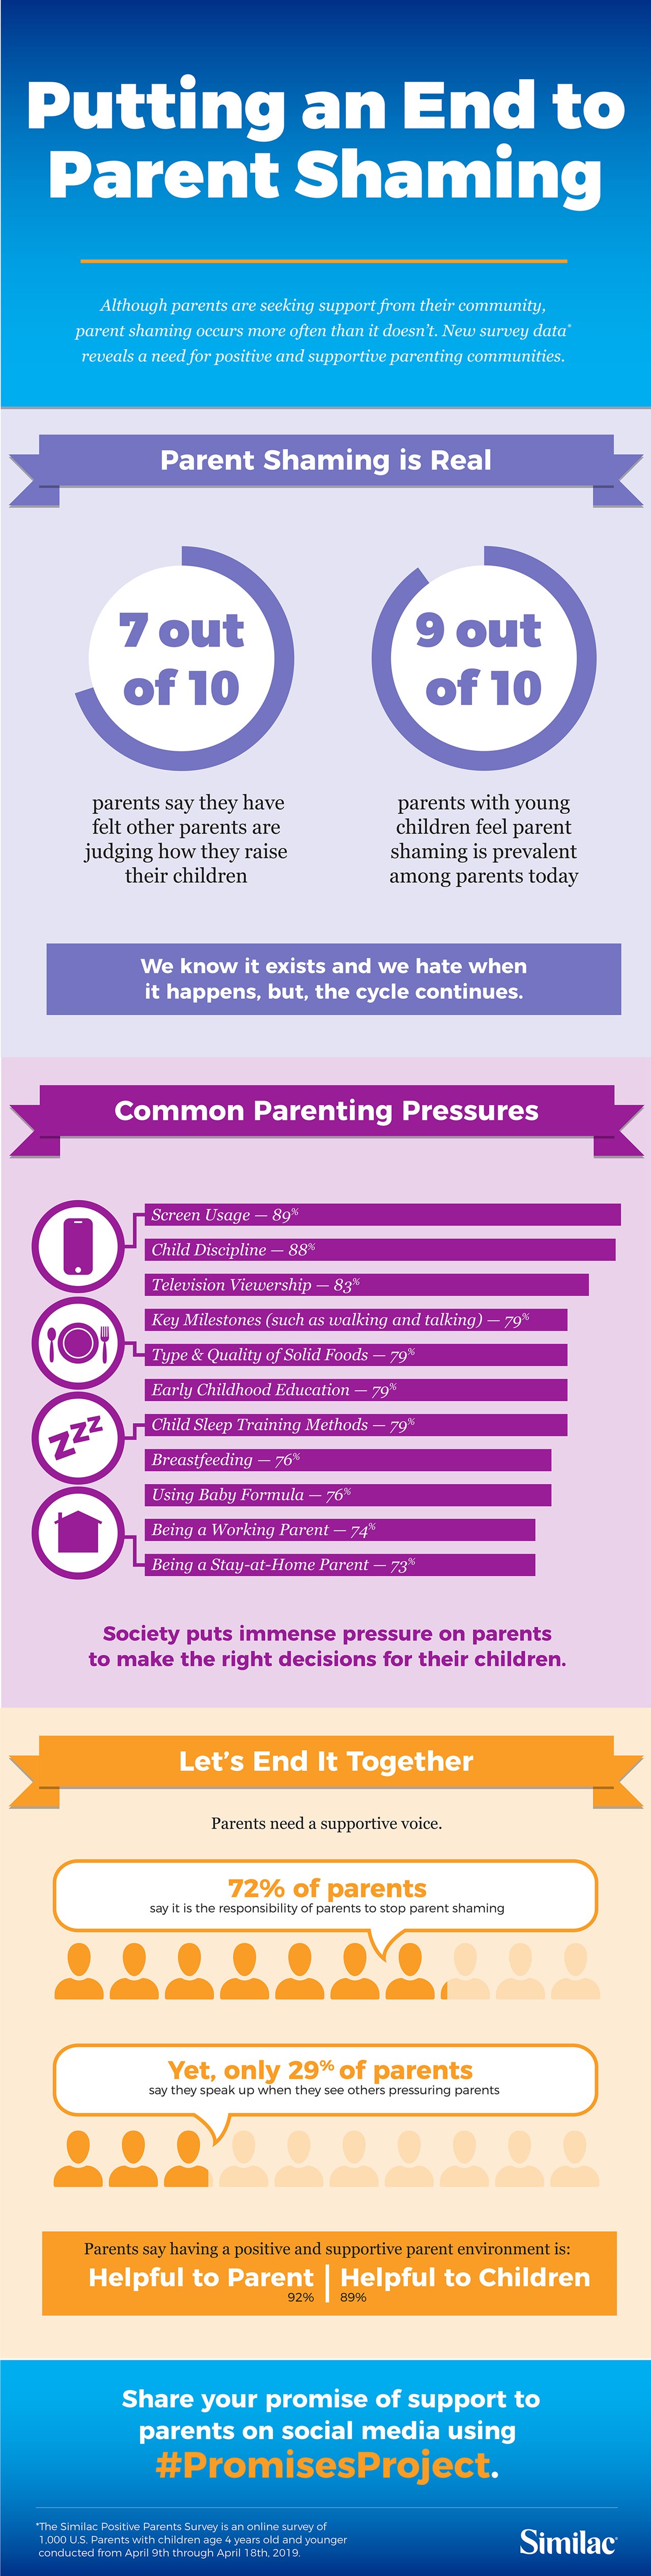 Putting An End To Parent Shaming Infographic The Morning Call